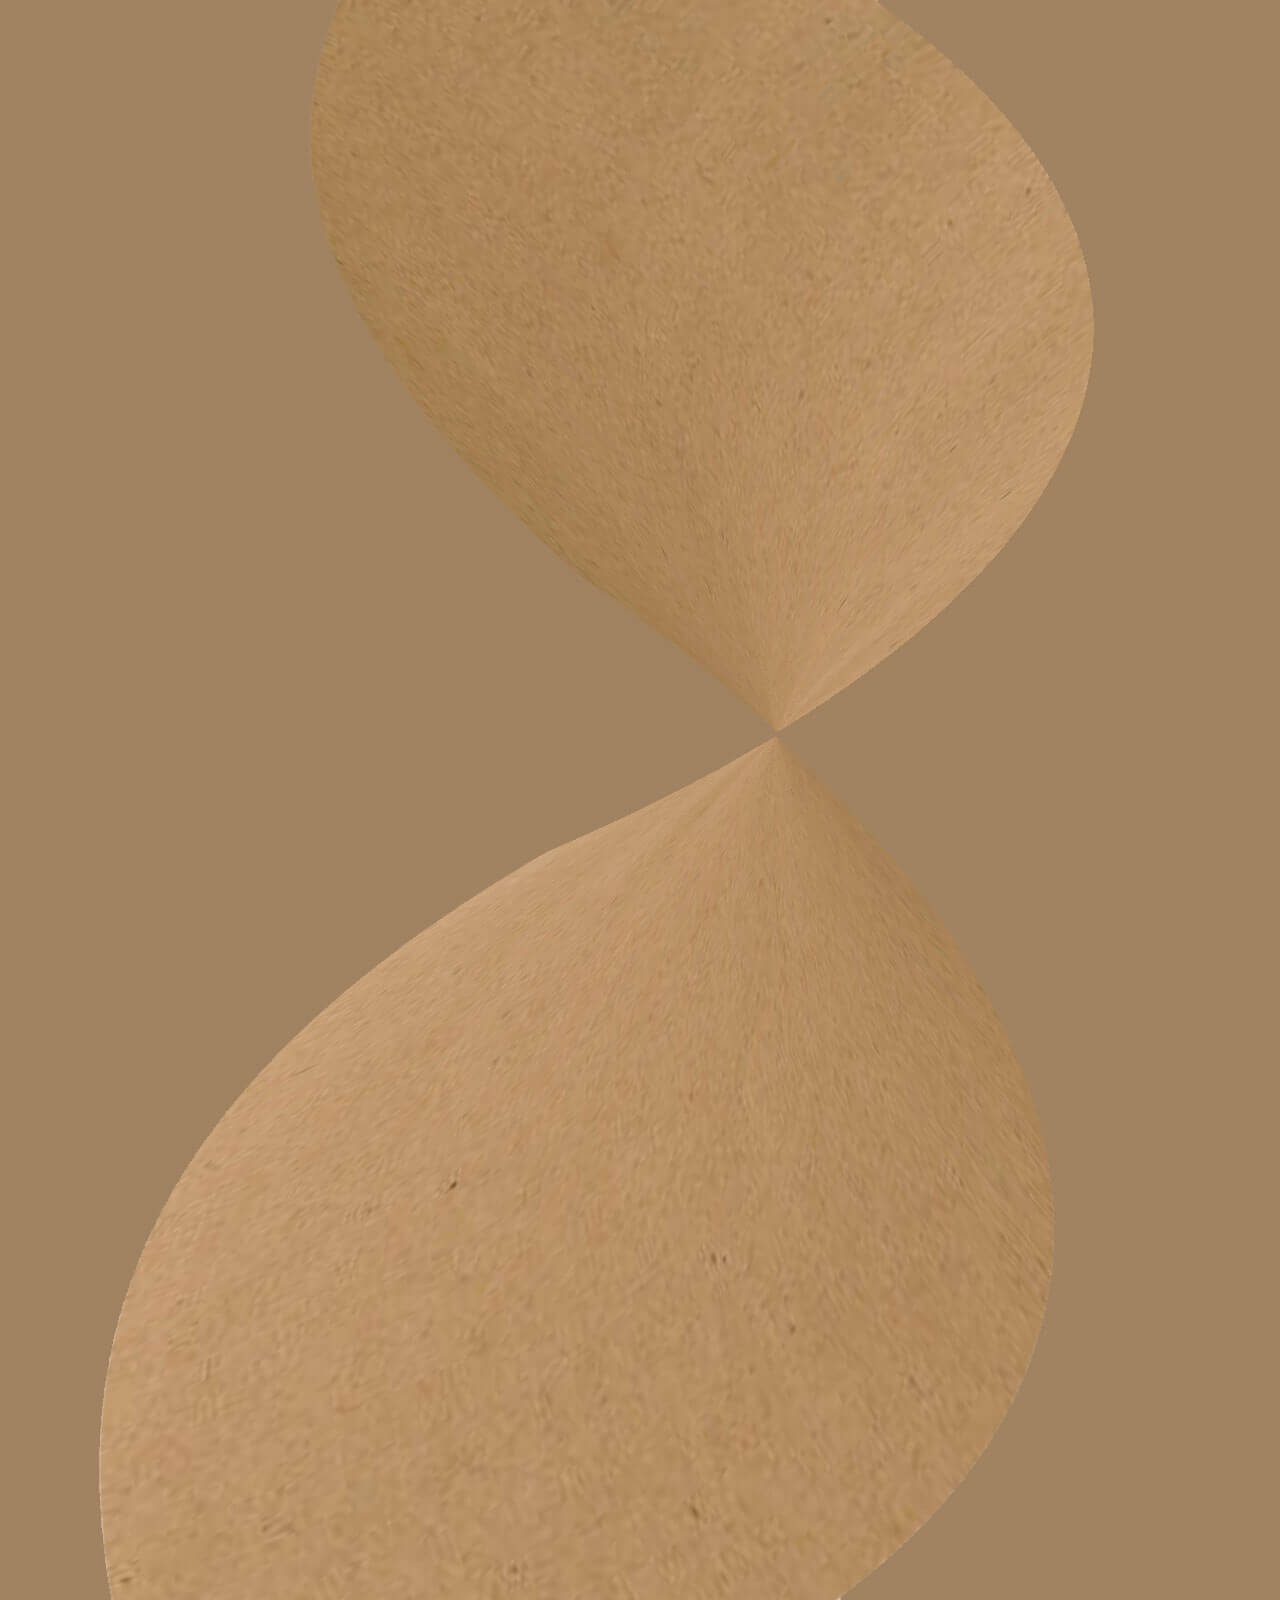 Kraft Paper used for many Industrial and Commercial Applications